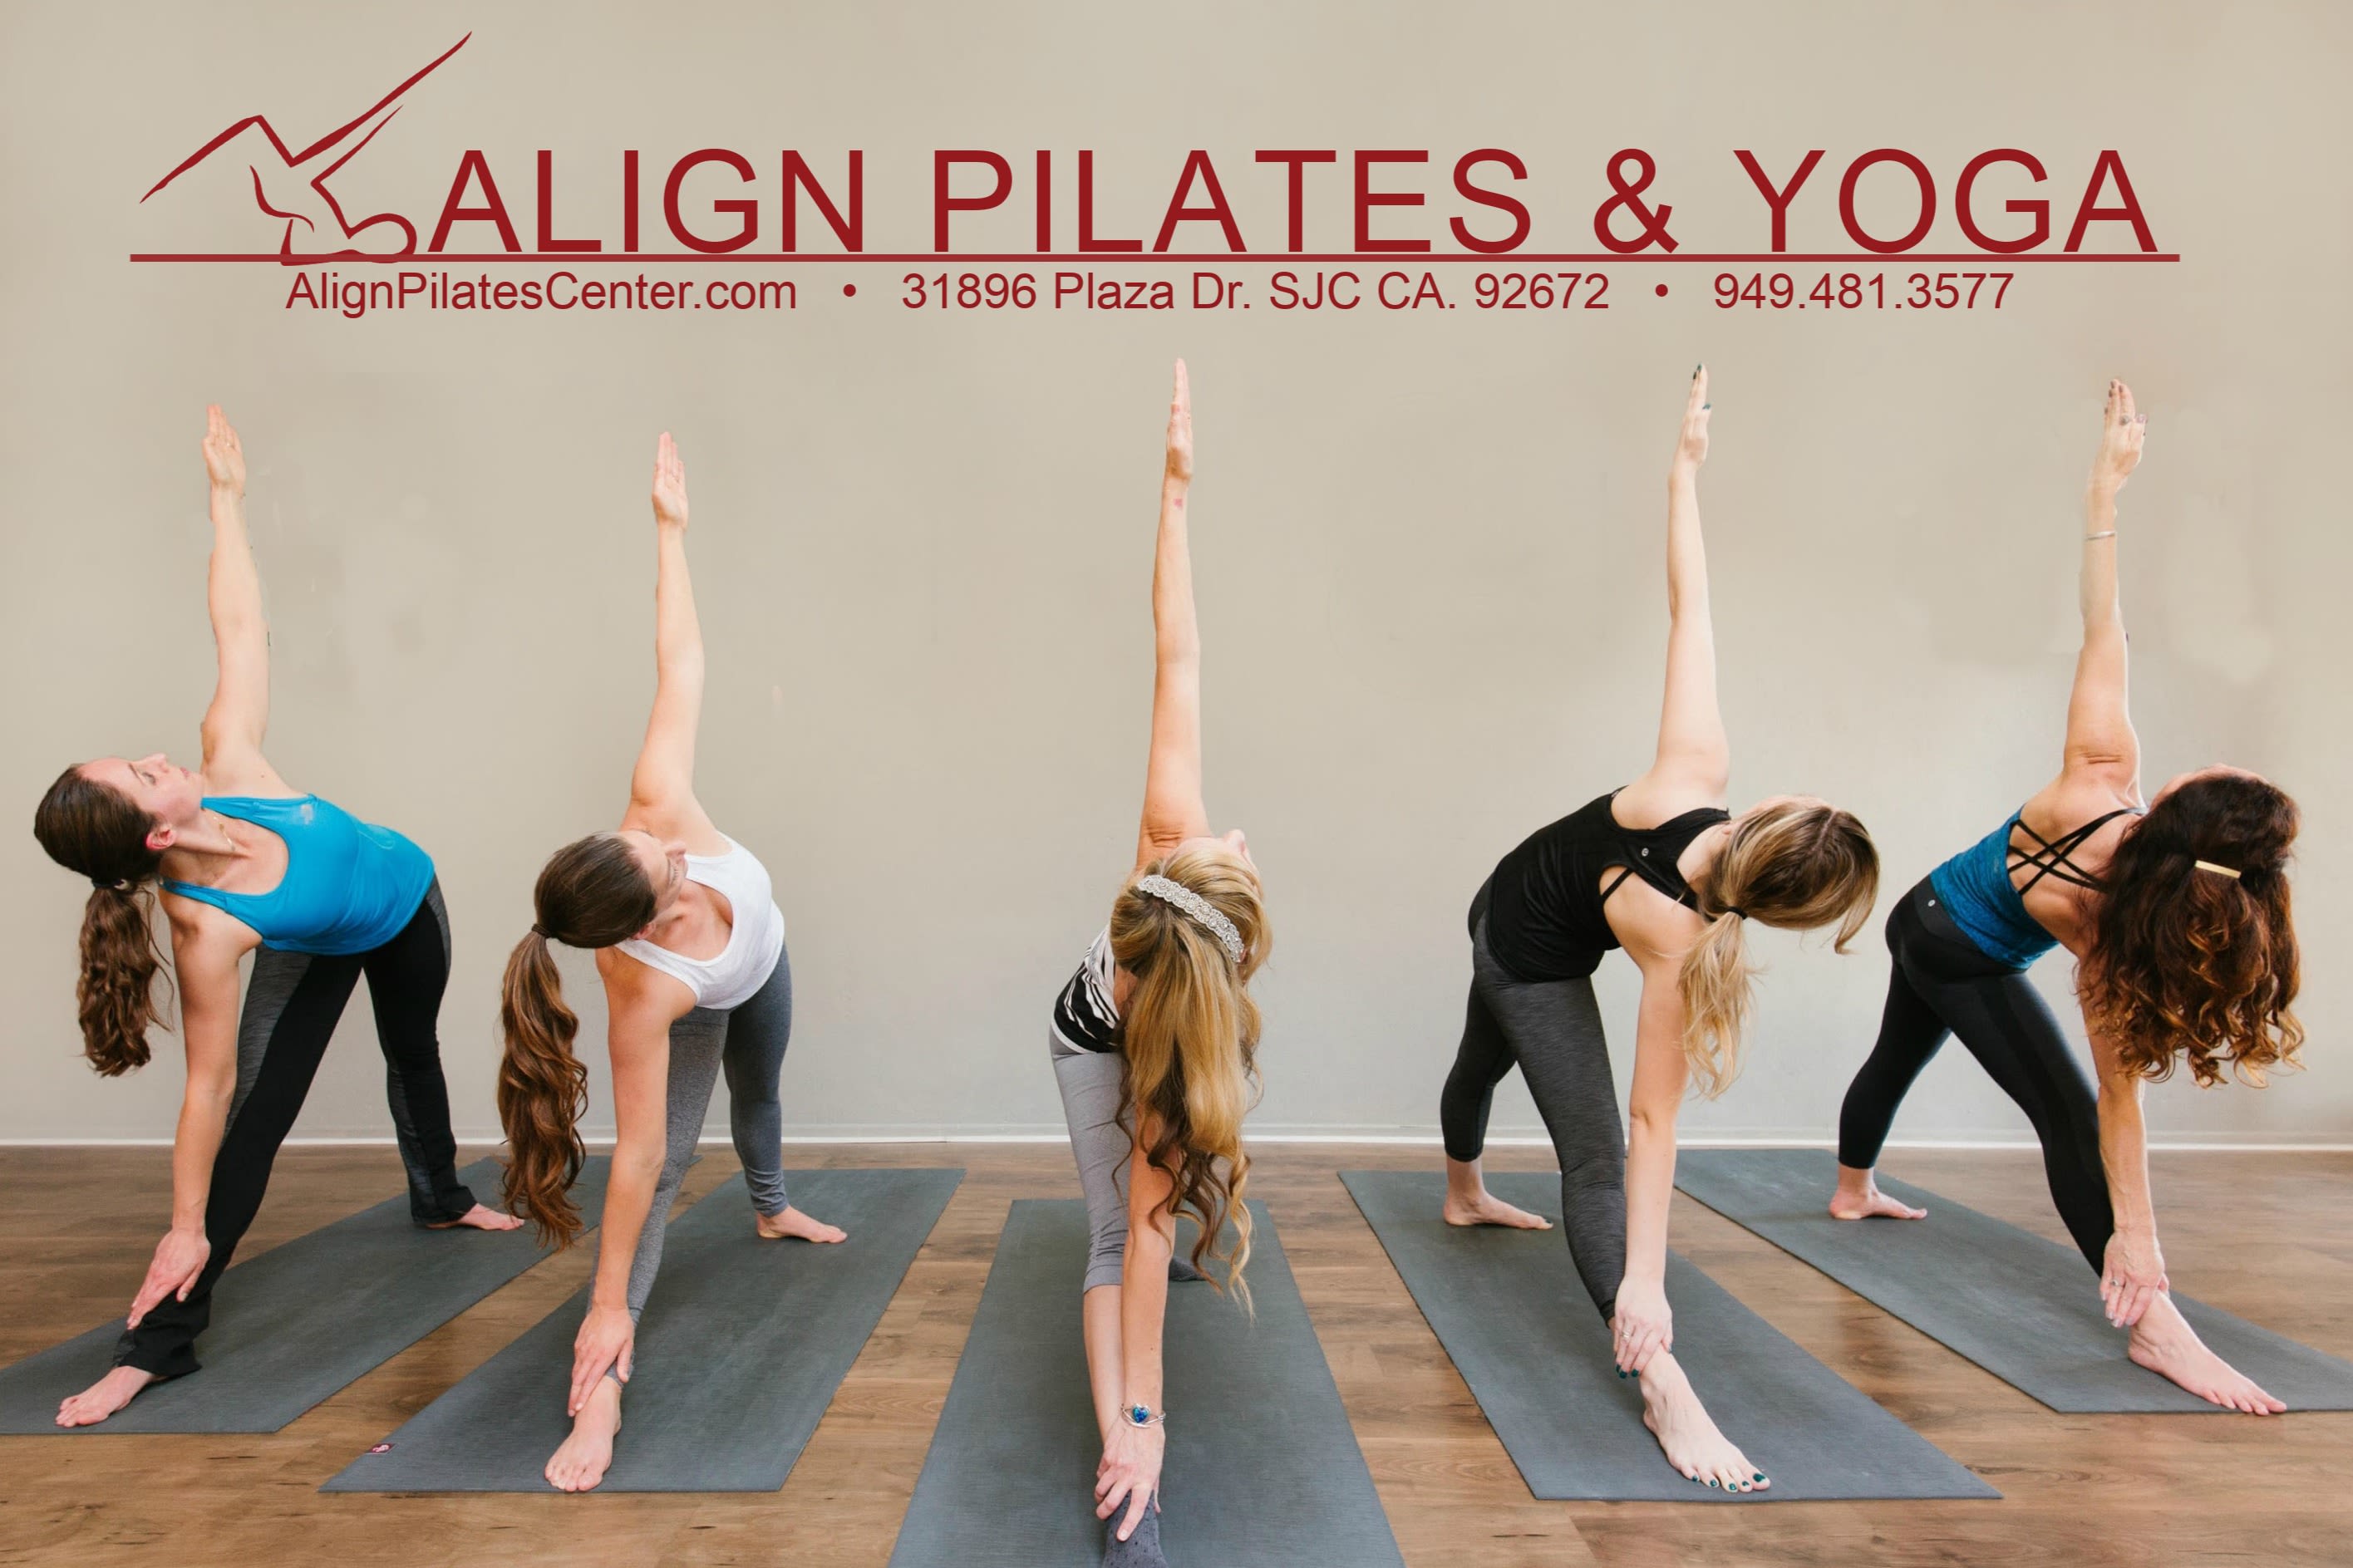 Align Pilates and Yoga Center: Read Reviews and Book Classes on